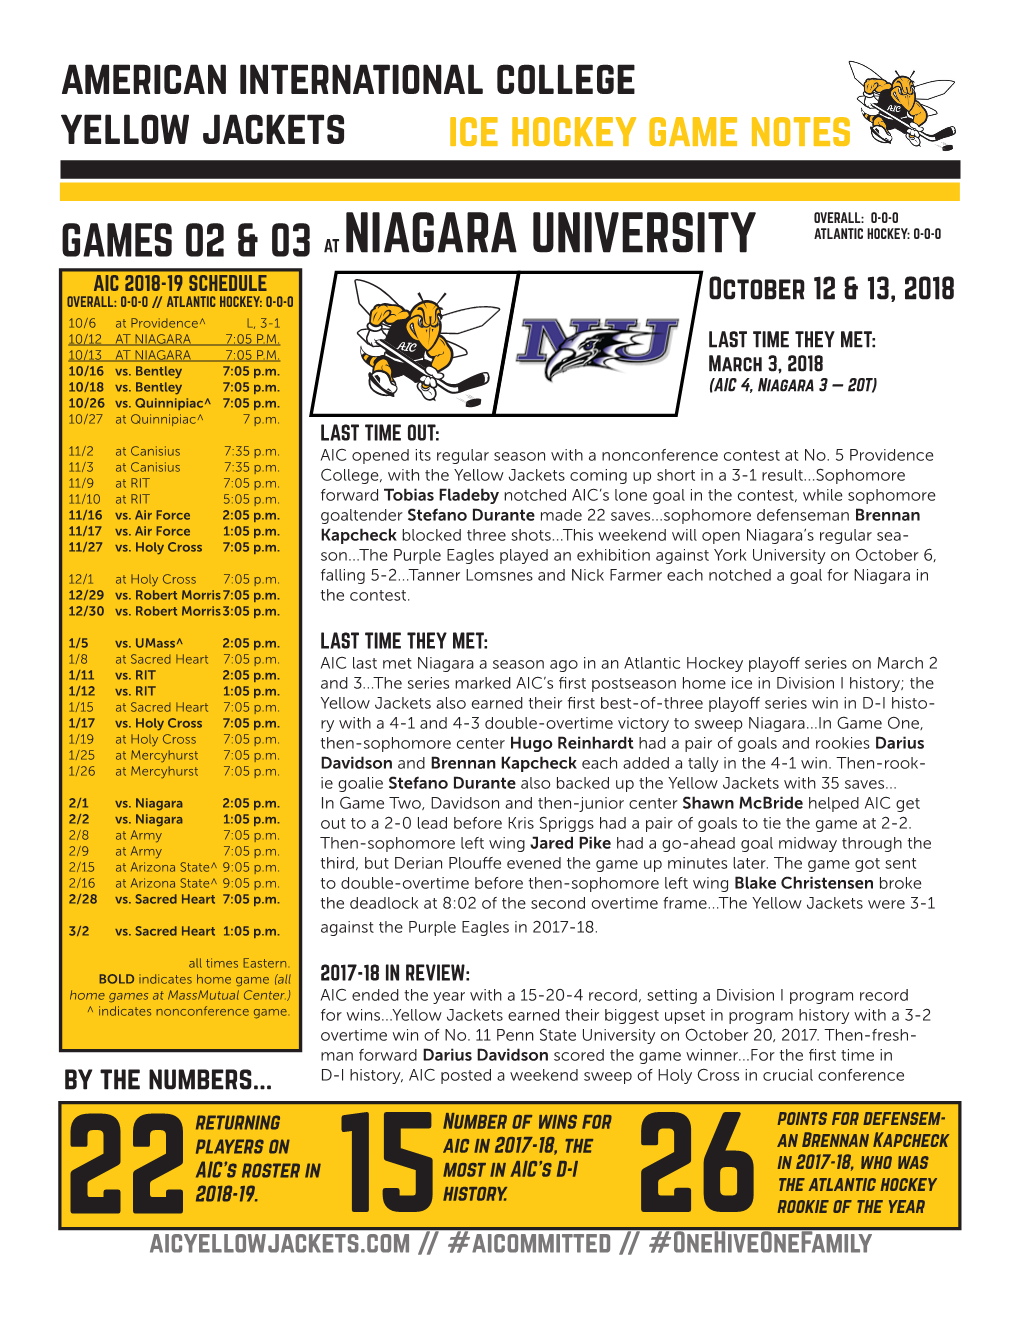 American International College Yellow Jackets Ice Hockey Game Notes